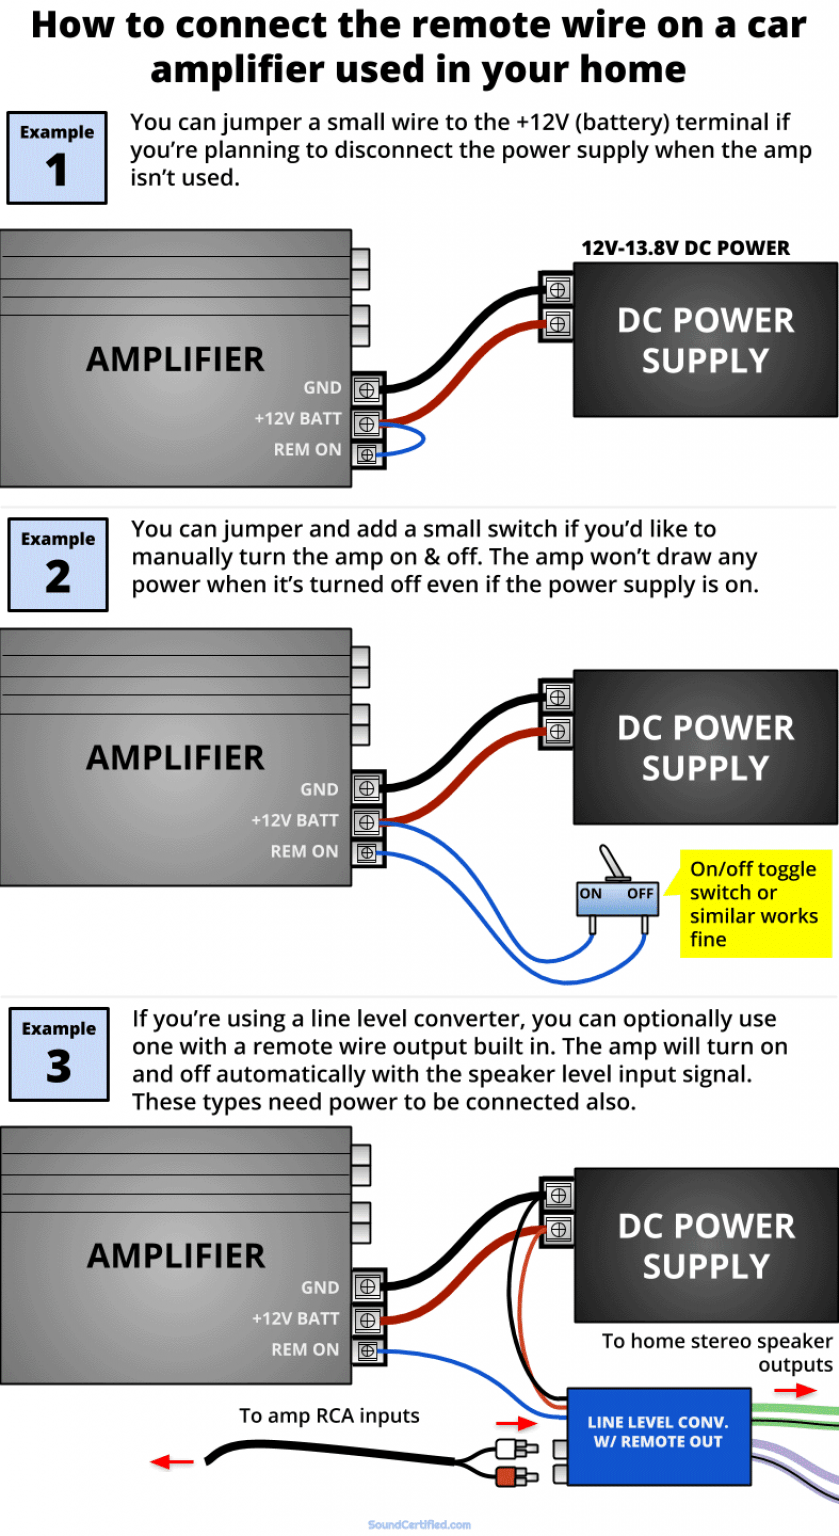 How To Connect A Car Amp To A Home Stereo (With Diagrams)